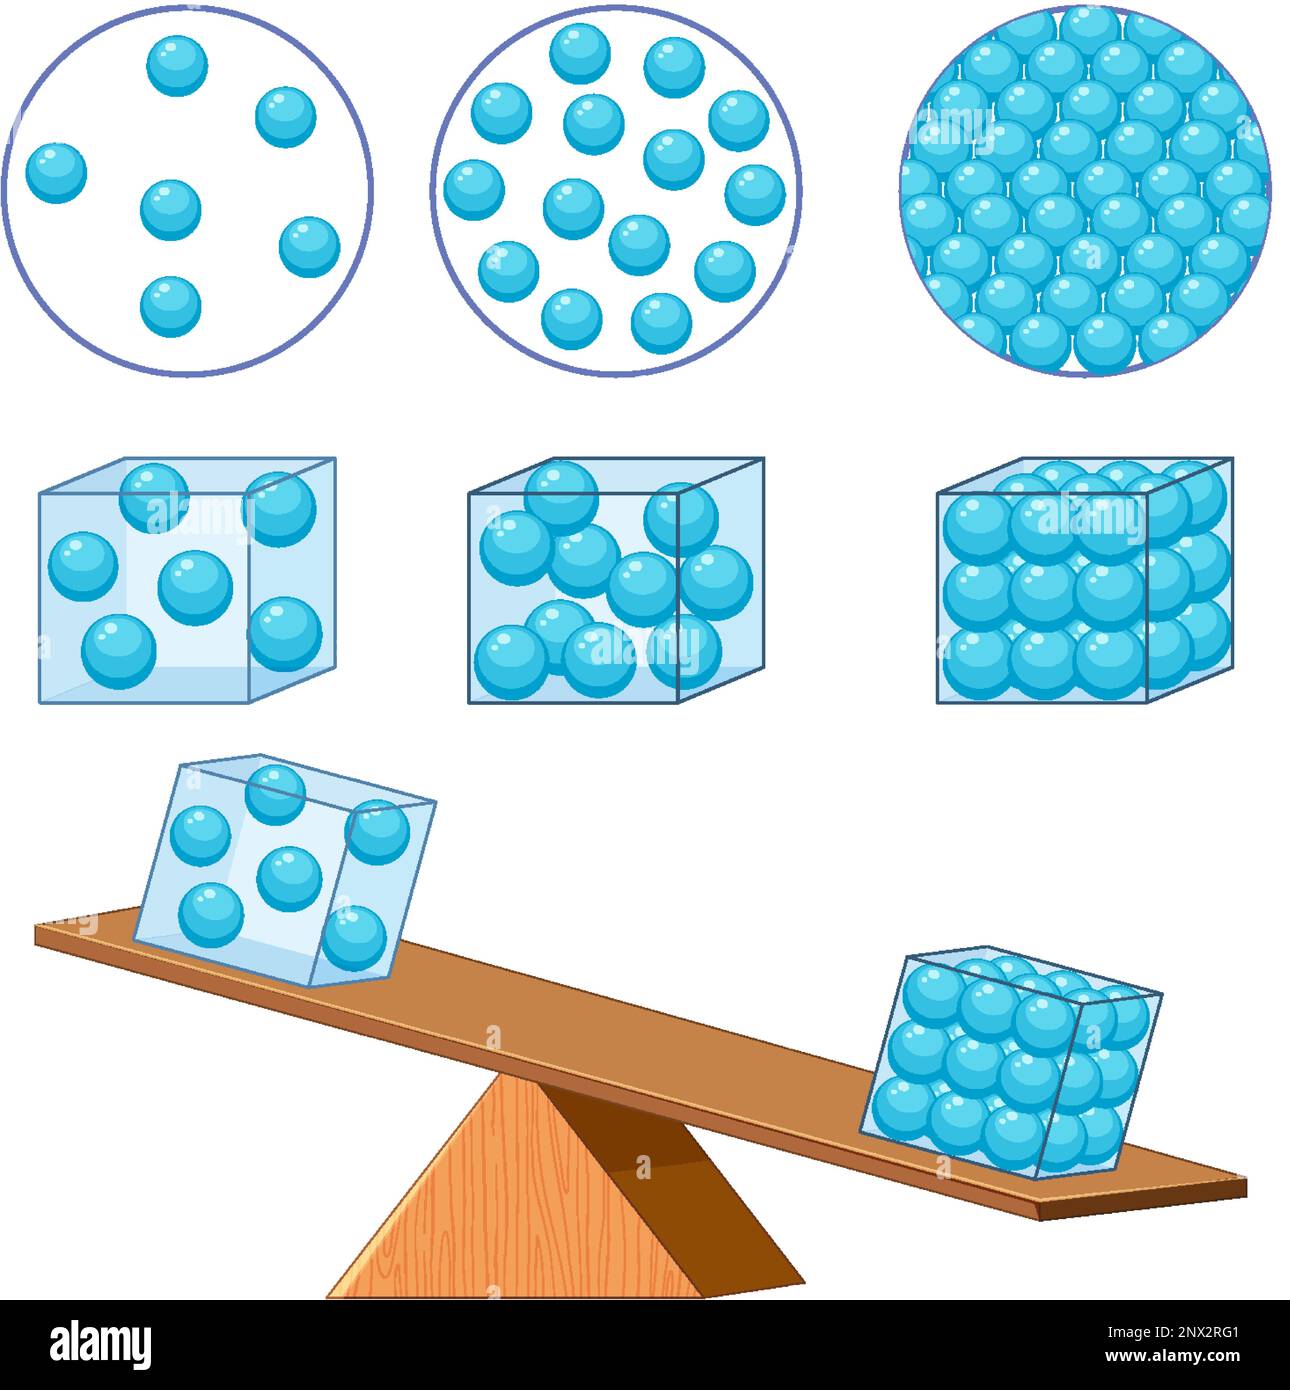 Density states of matter for learning chemistry and physics